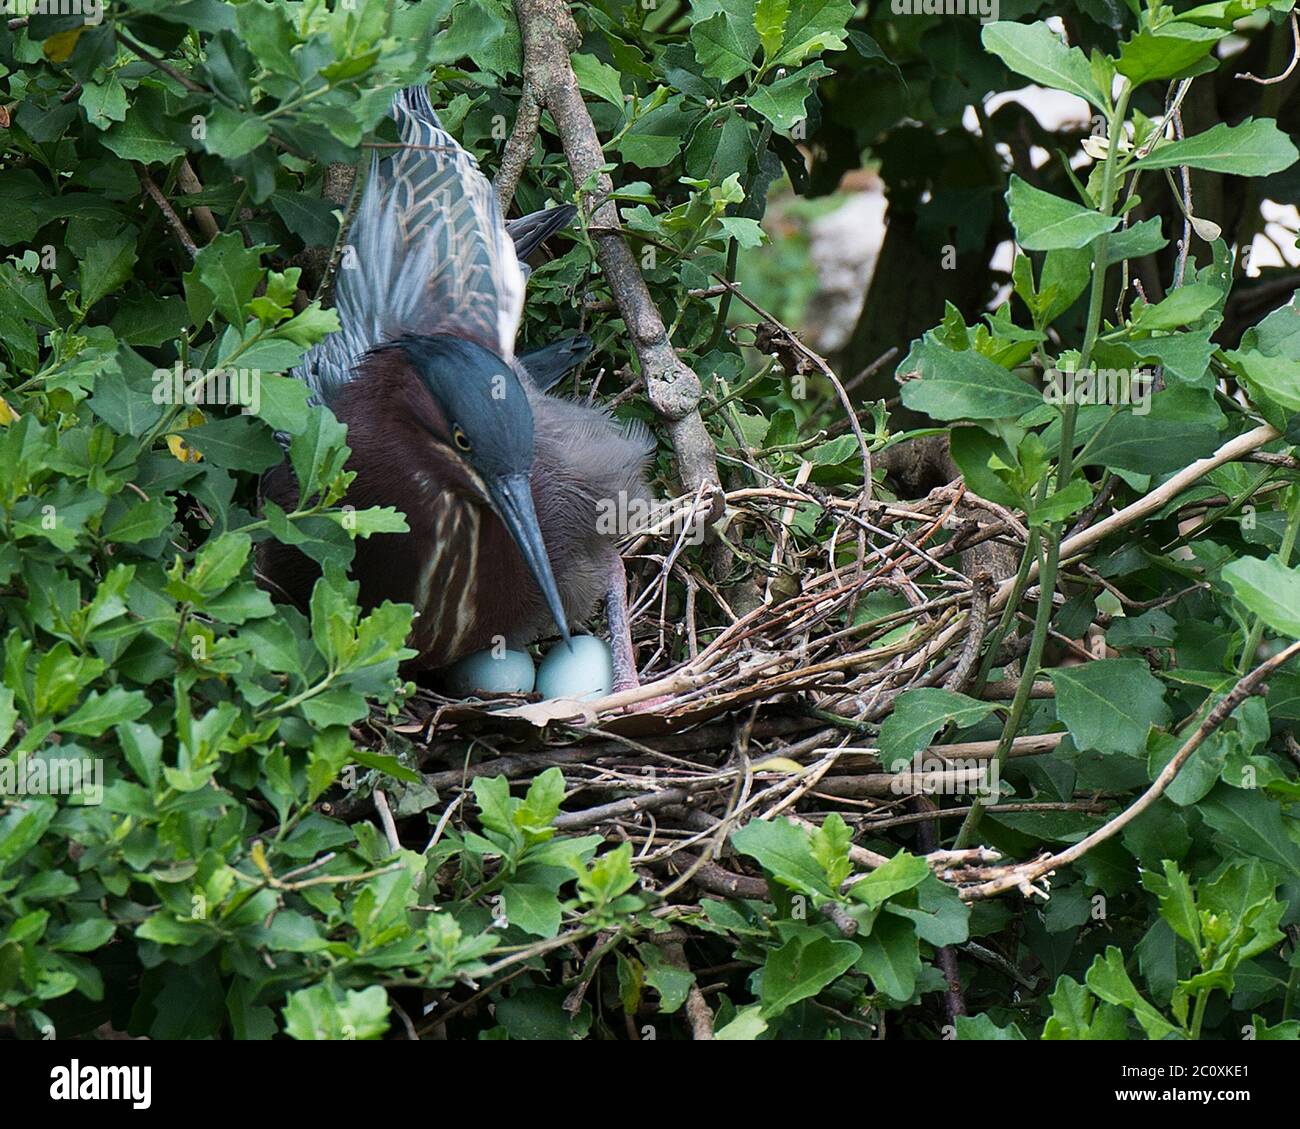 Green Heron bird close-up on the nest with eggs with foreground and background of foliage in its environment and surrounding. Stock Photo